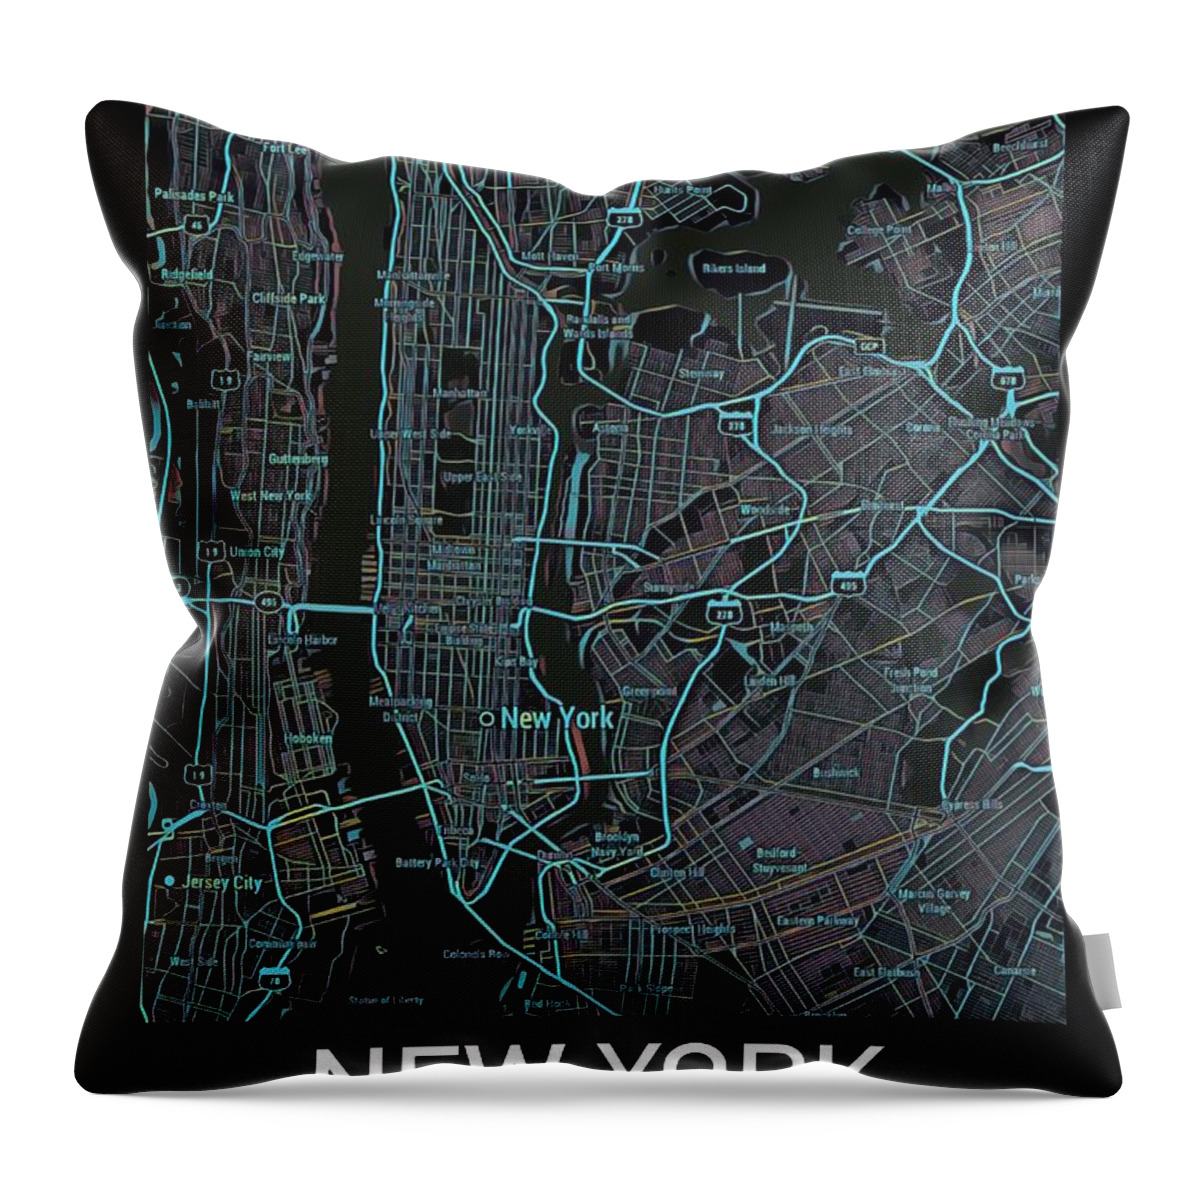 Nyc Throw Pillow featuring the digital art New York City Map Black edition by HELGE Art Gallery